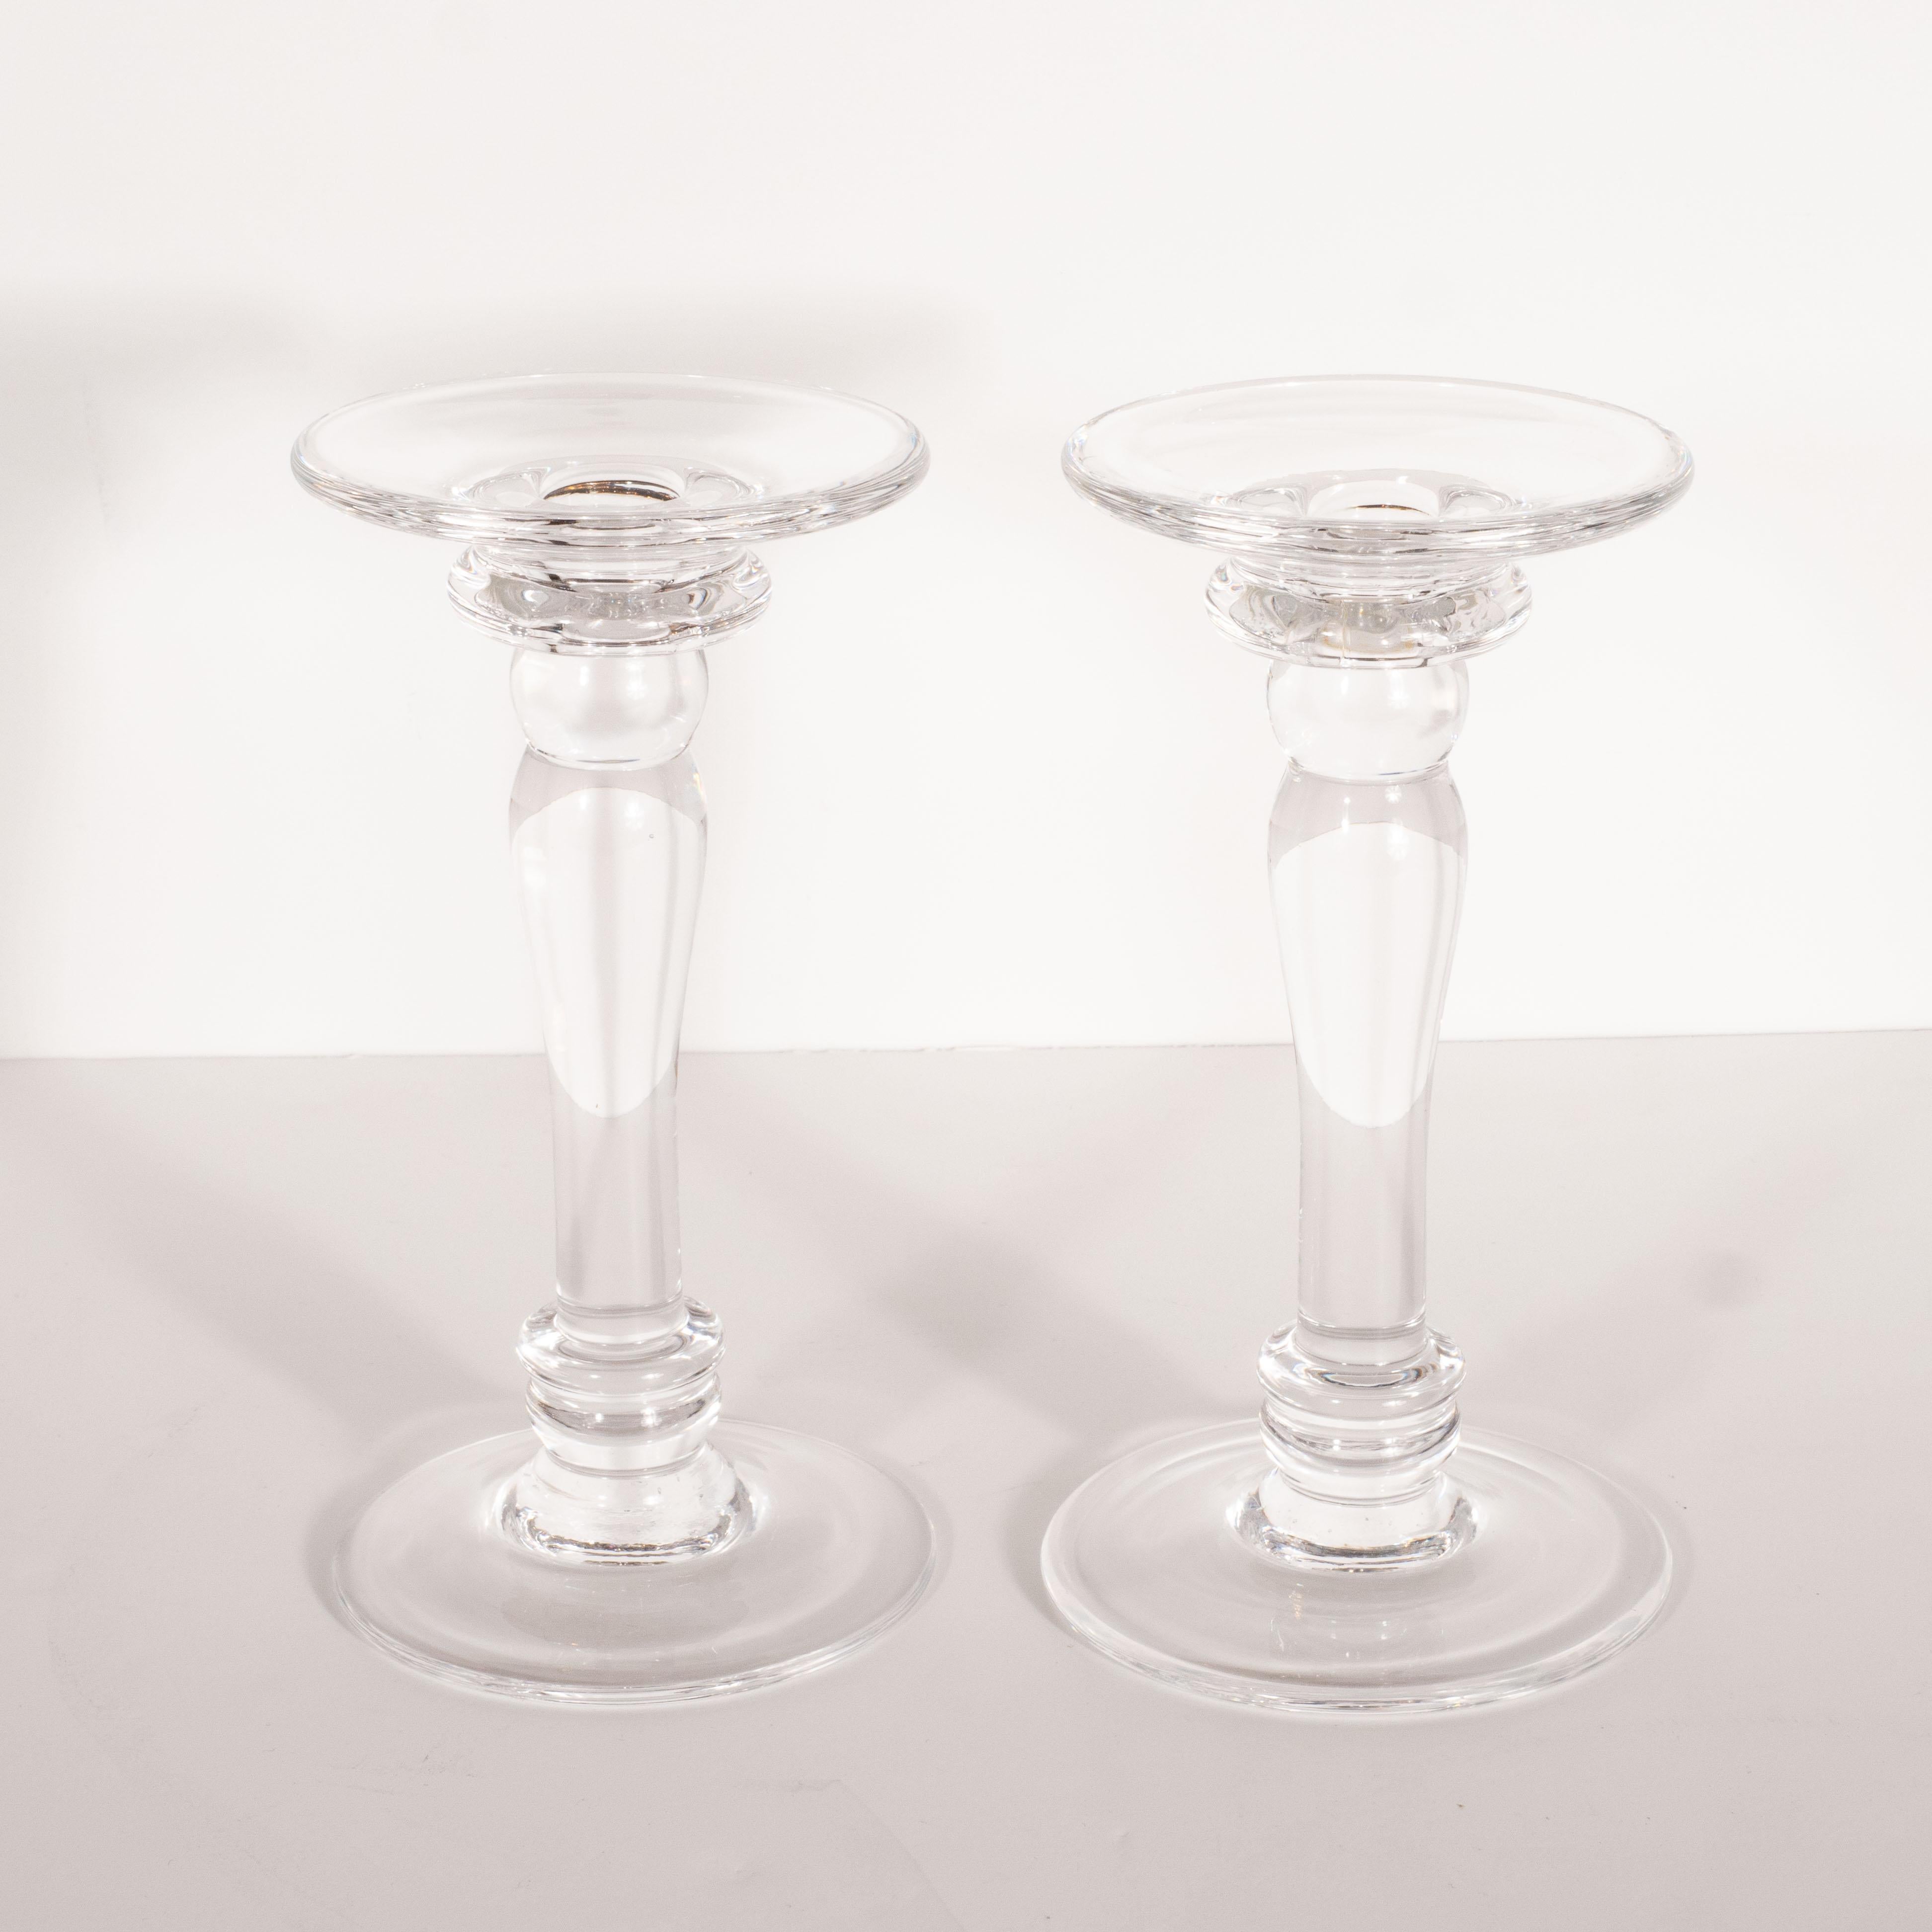 This elegant pair of Mid-Century Modern candlesticks was realized in the United States, circa 1960. Modeled after the Doric columns of ancient Greece, the piece offers a circular base and bobeche, a sinuously curved body with raised banded detailing